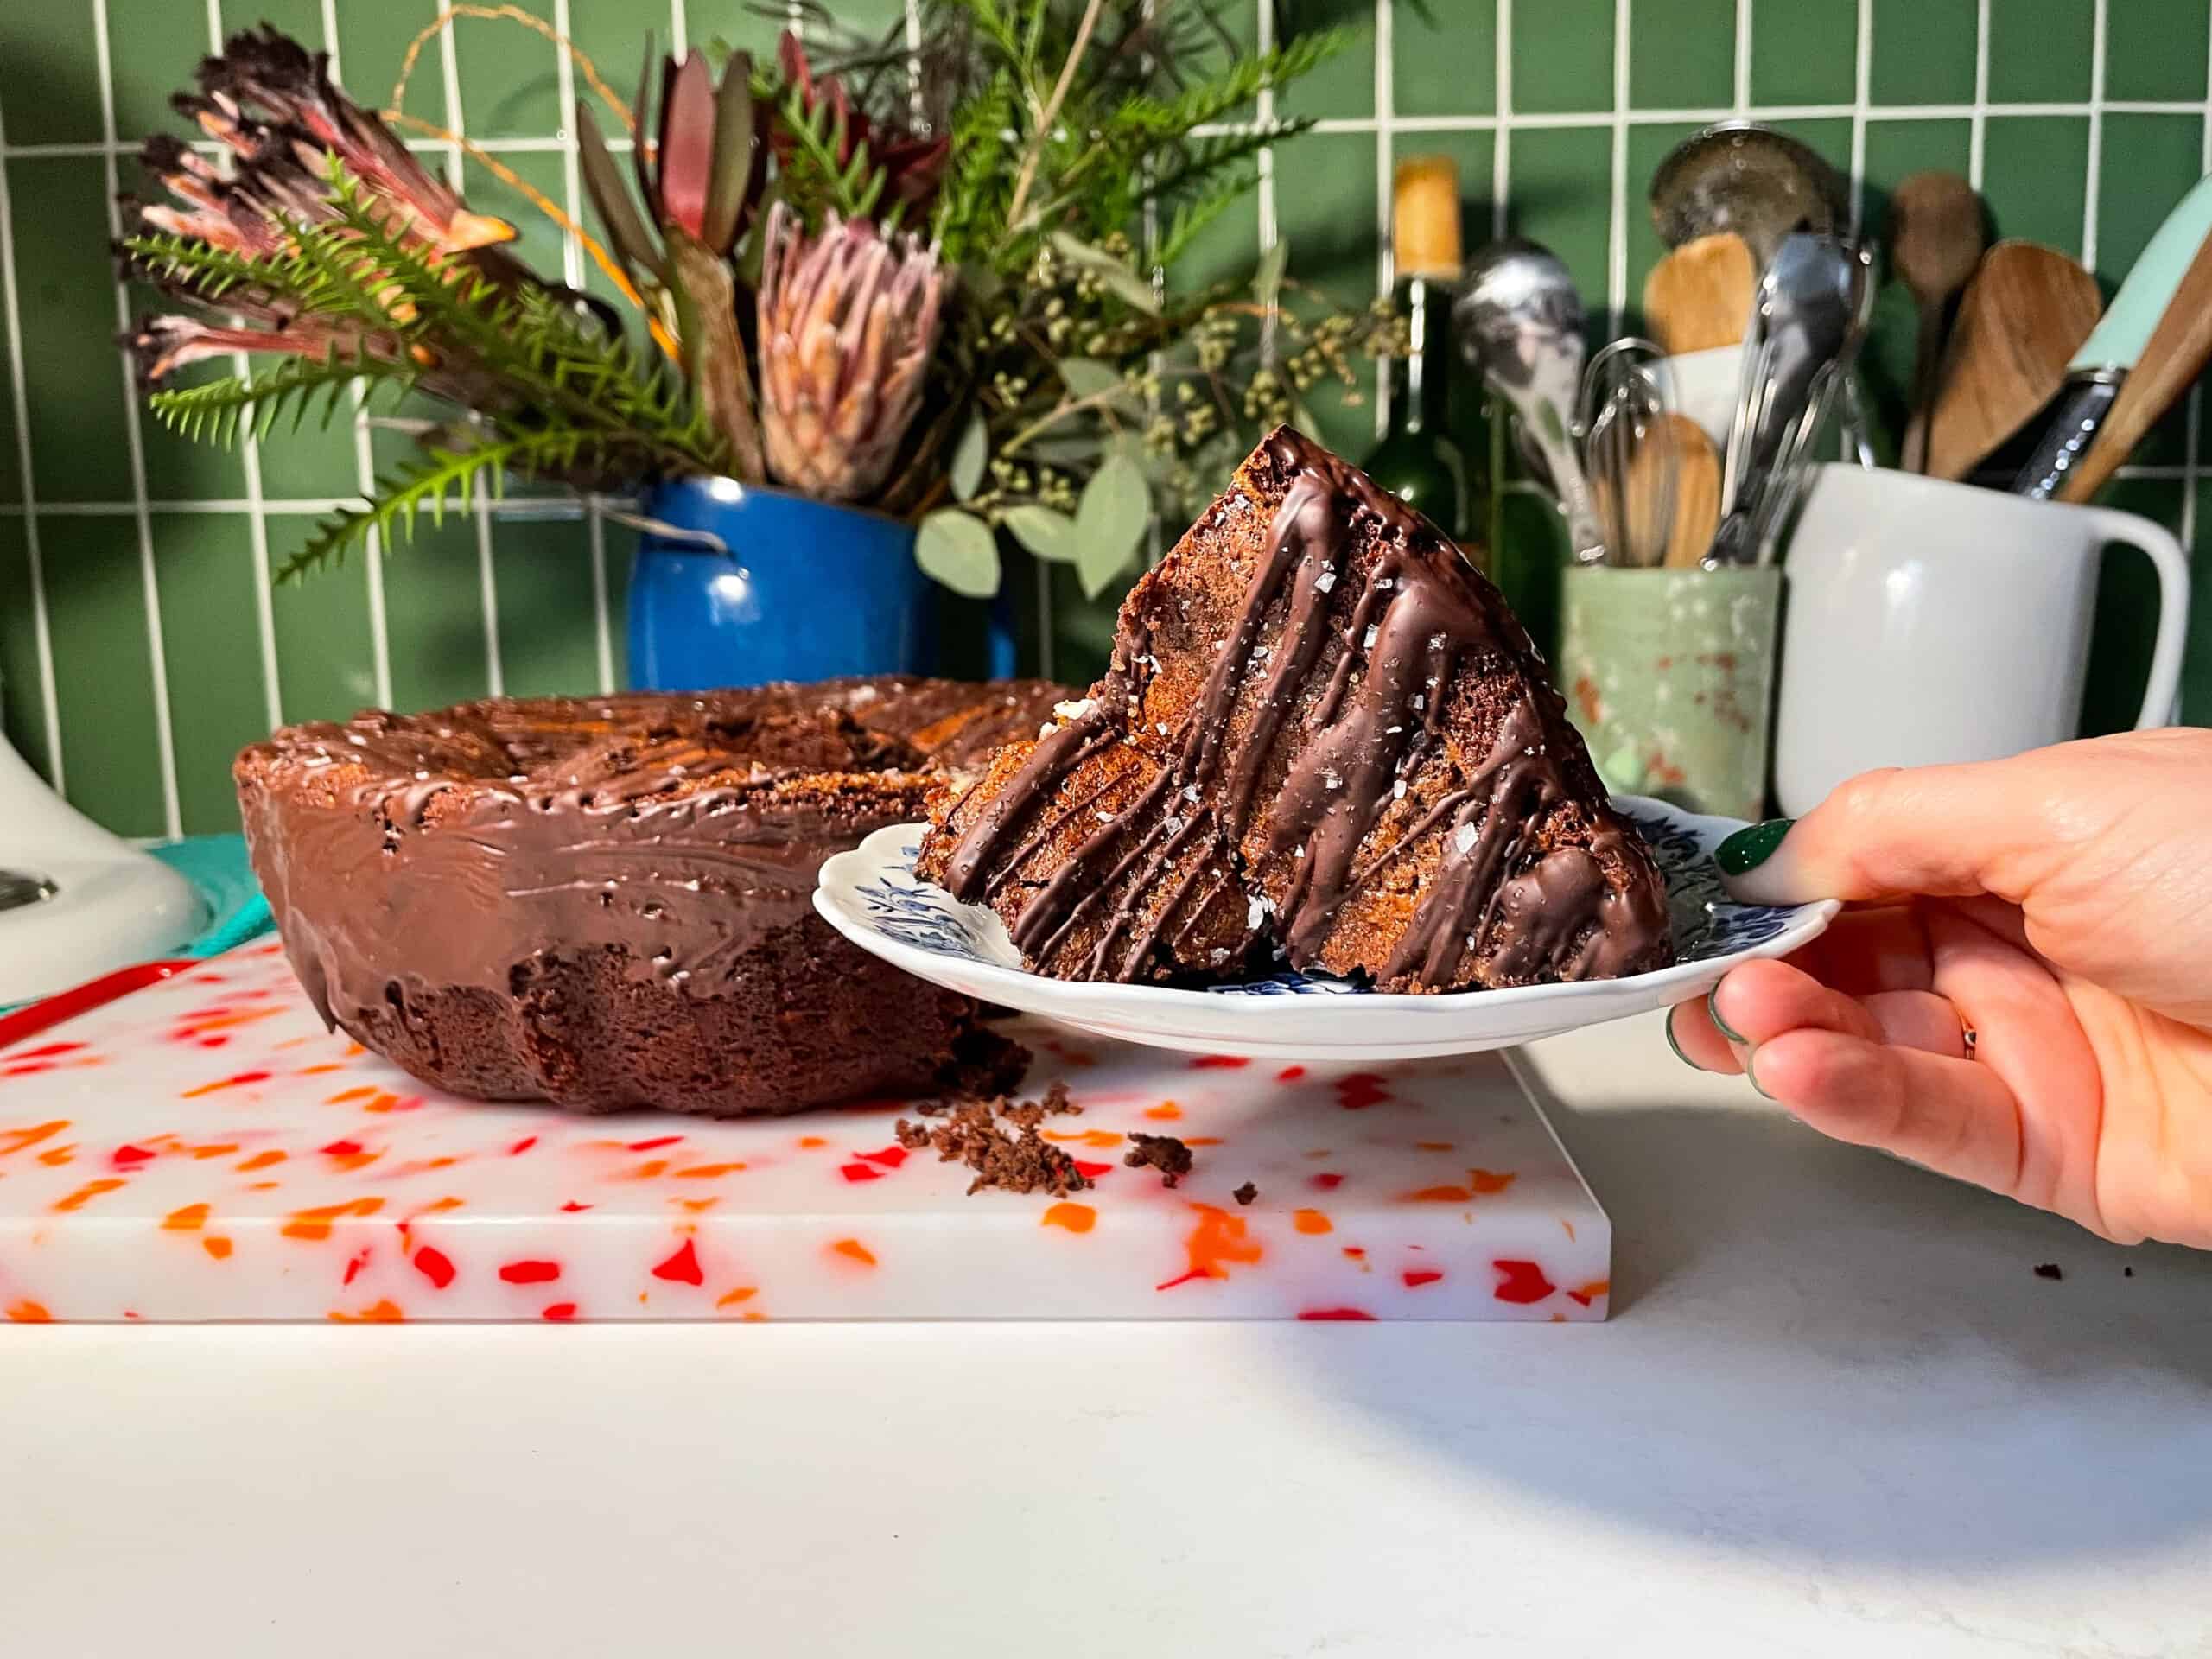 Hand holding a plate with a slice of chocolate cake. Remainder of cake plated on cutting board in kitchen appears in the background.